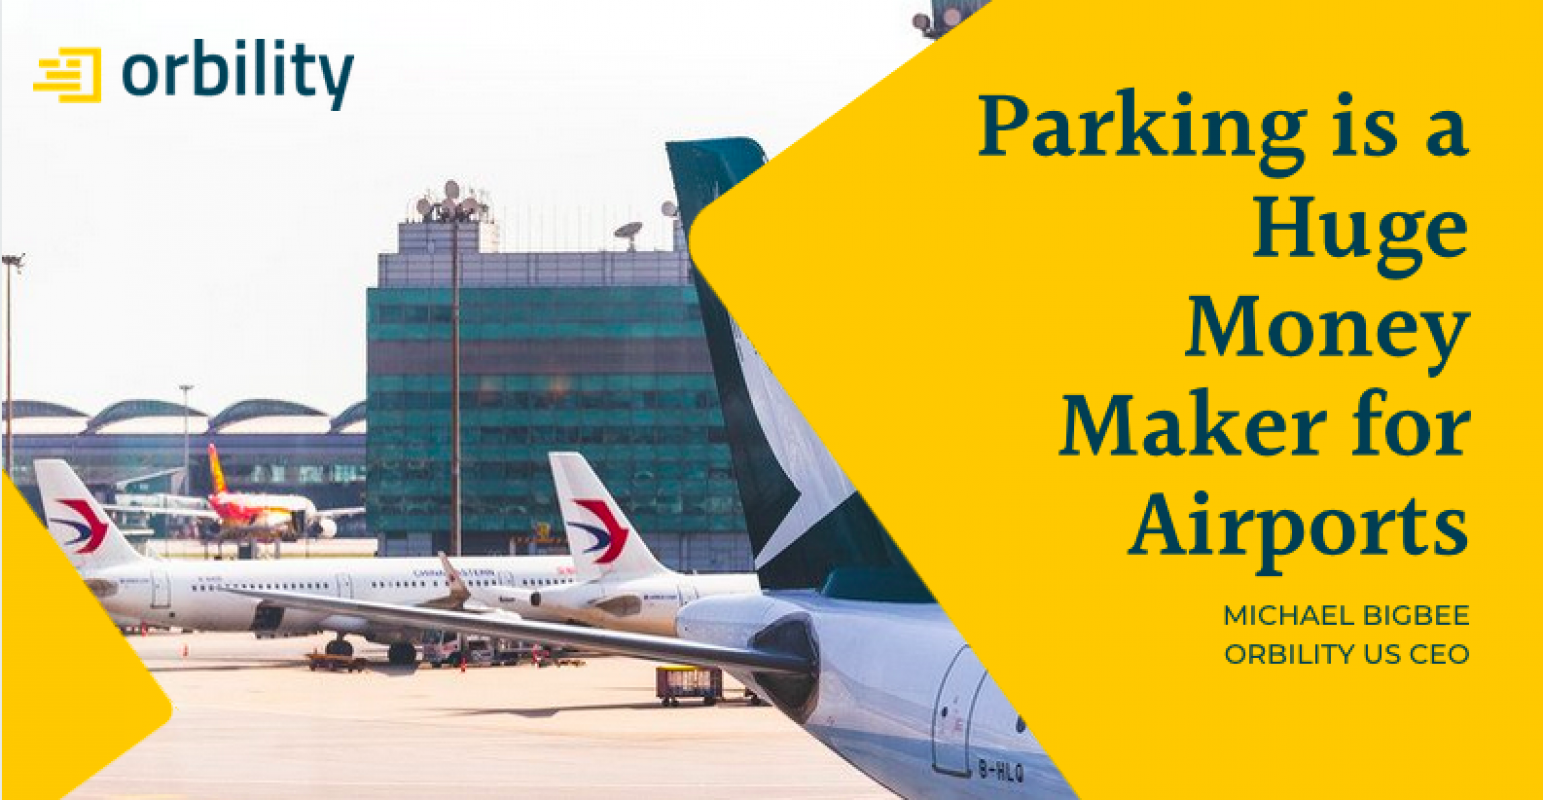 Parking is a Huge Money Maker for Airports